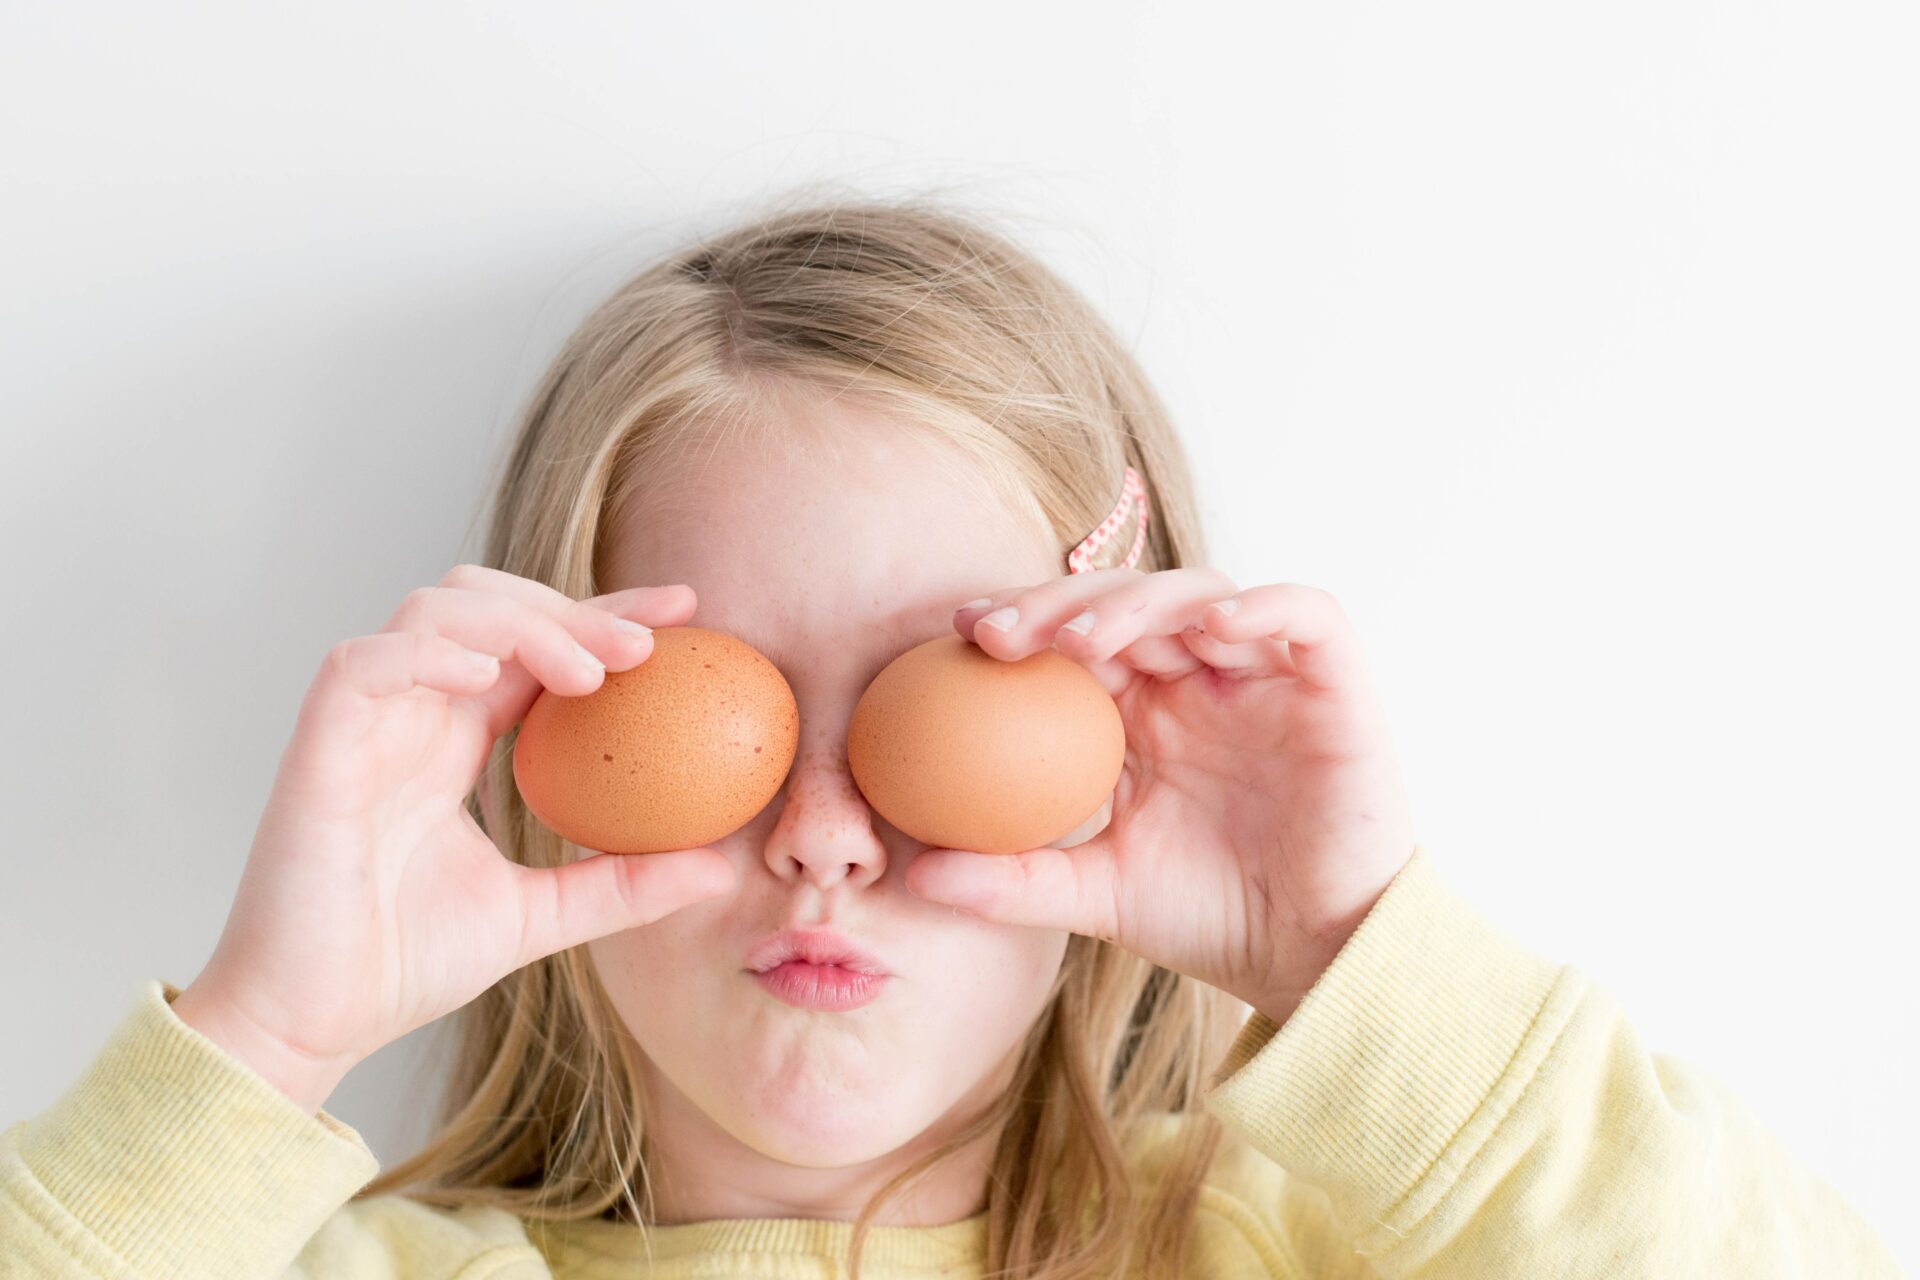 child holding brown eggs in front of her eyes